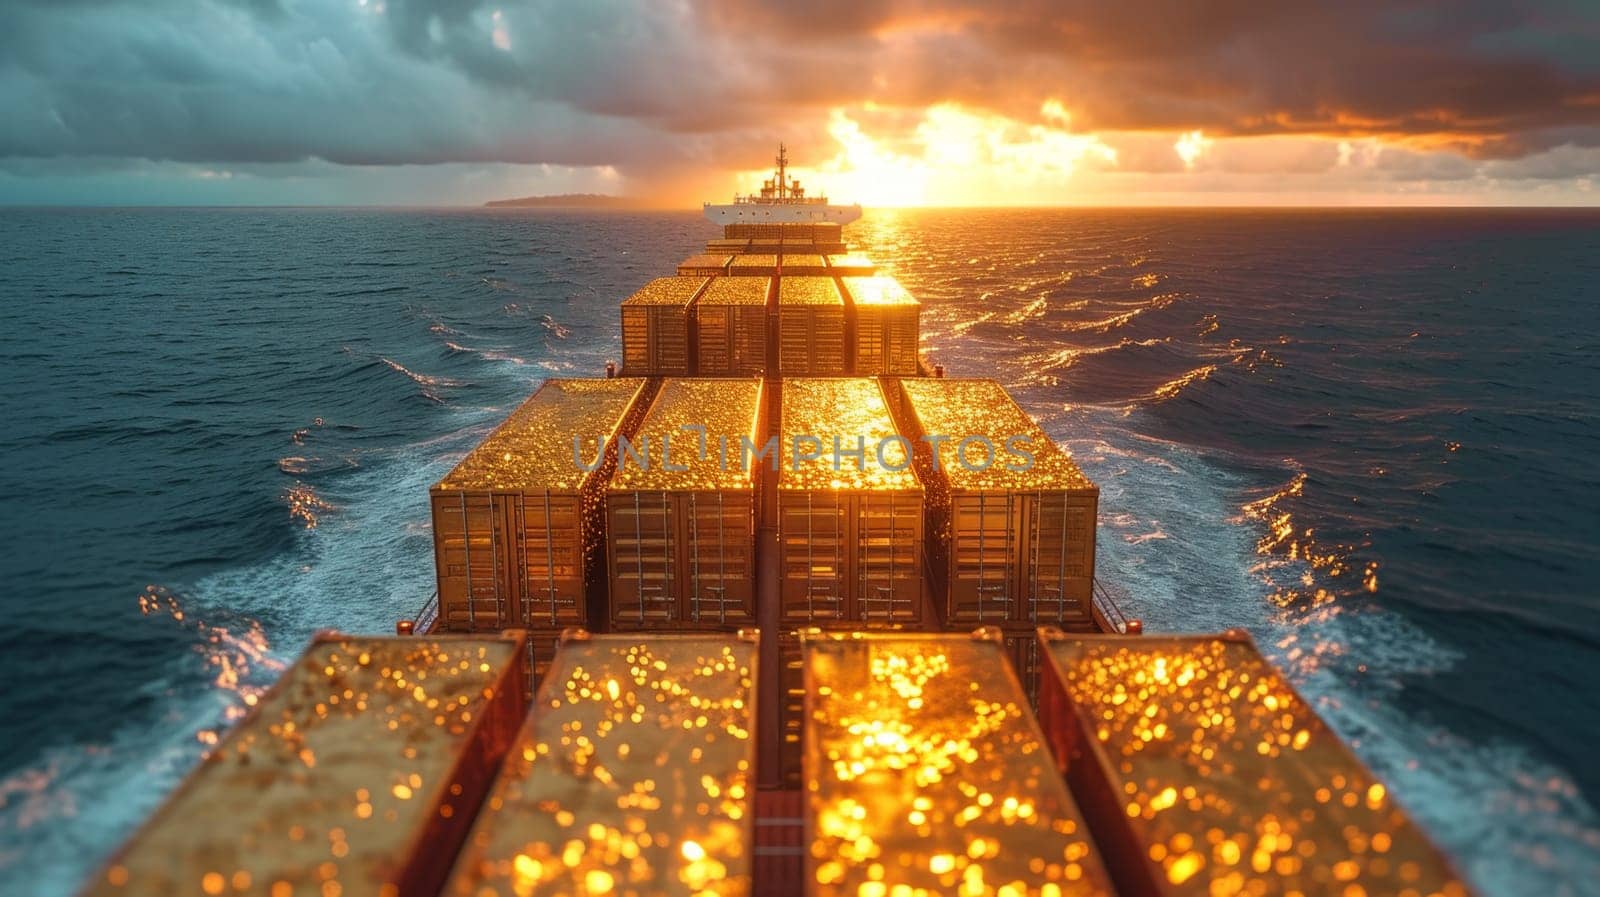 Gold containers with cargo on a container ship in the ocean at sunset.